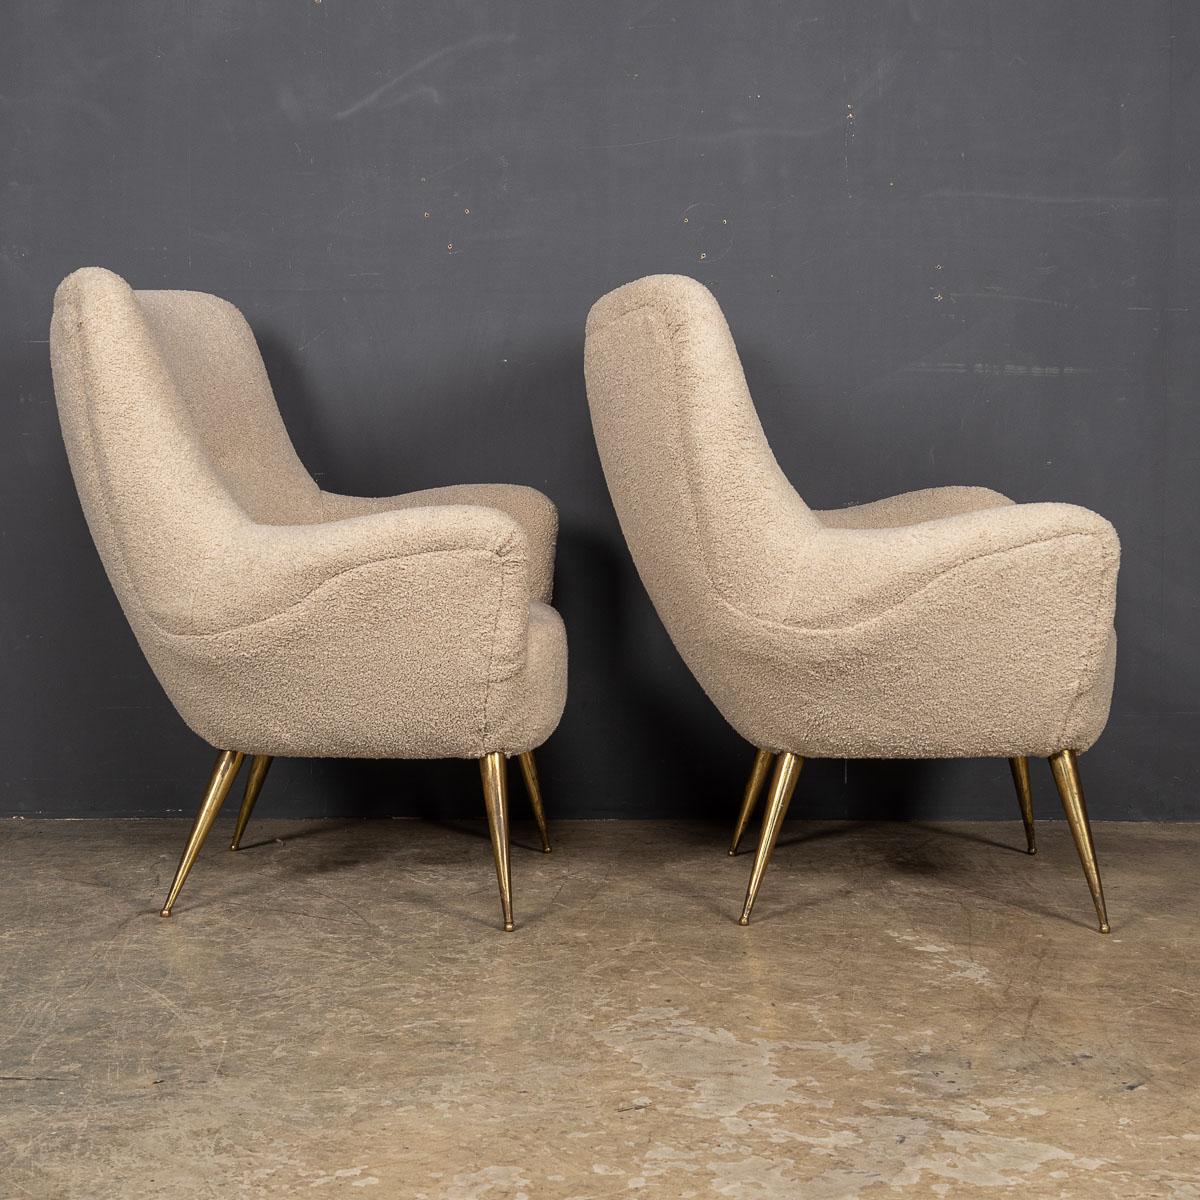 20th Century Pair Of Italian Armchairs In Cream Boucle, c.1950 For Sale 2